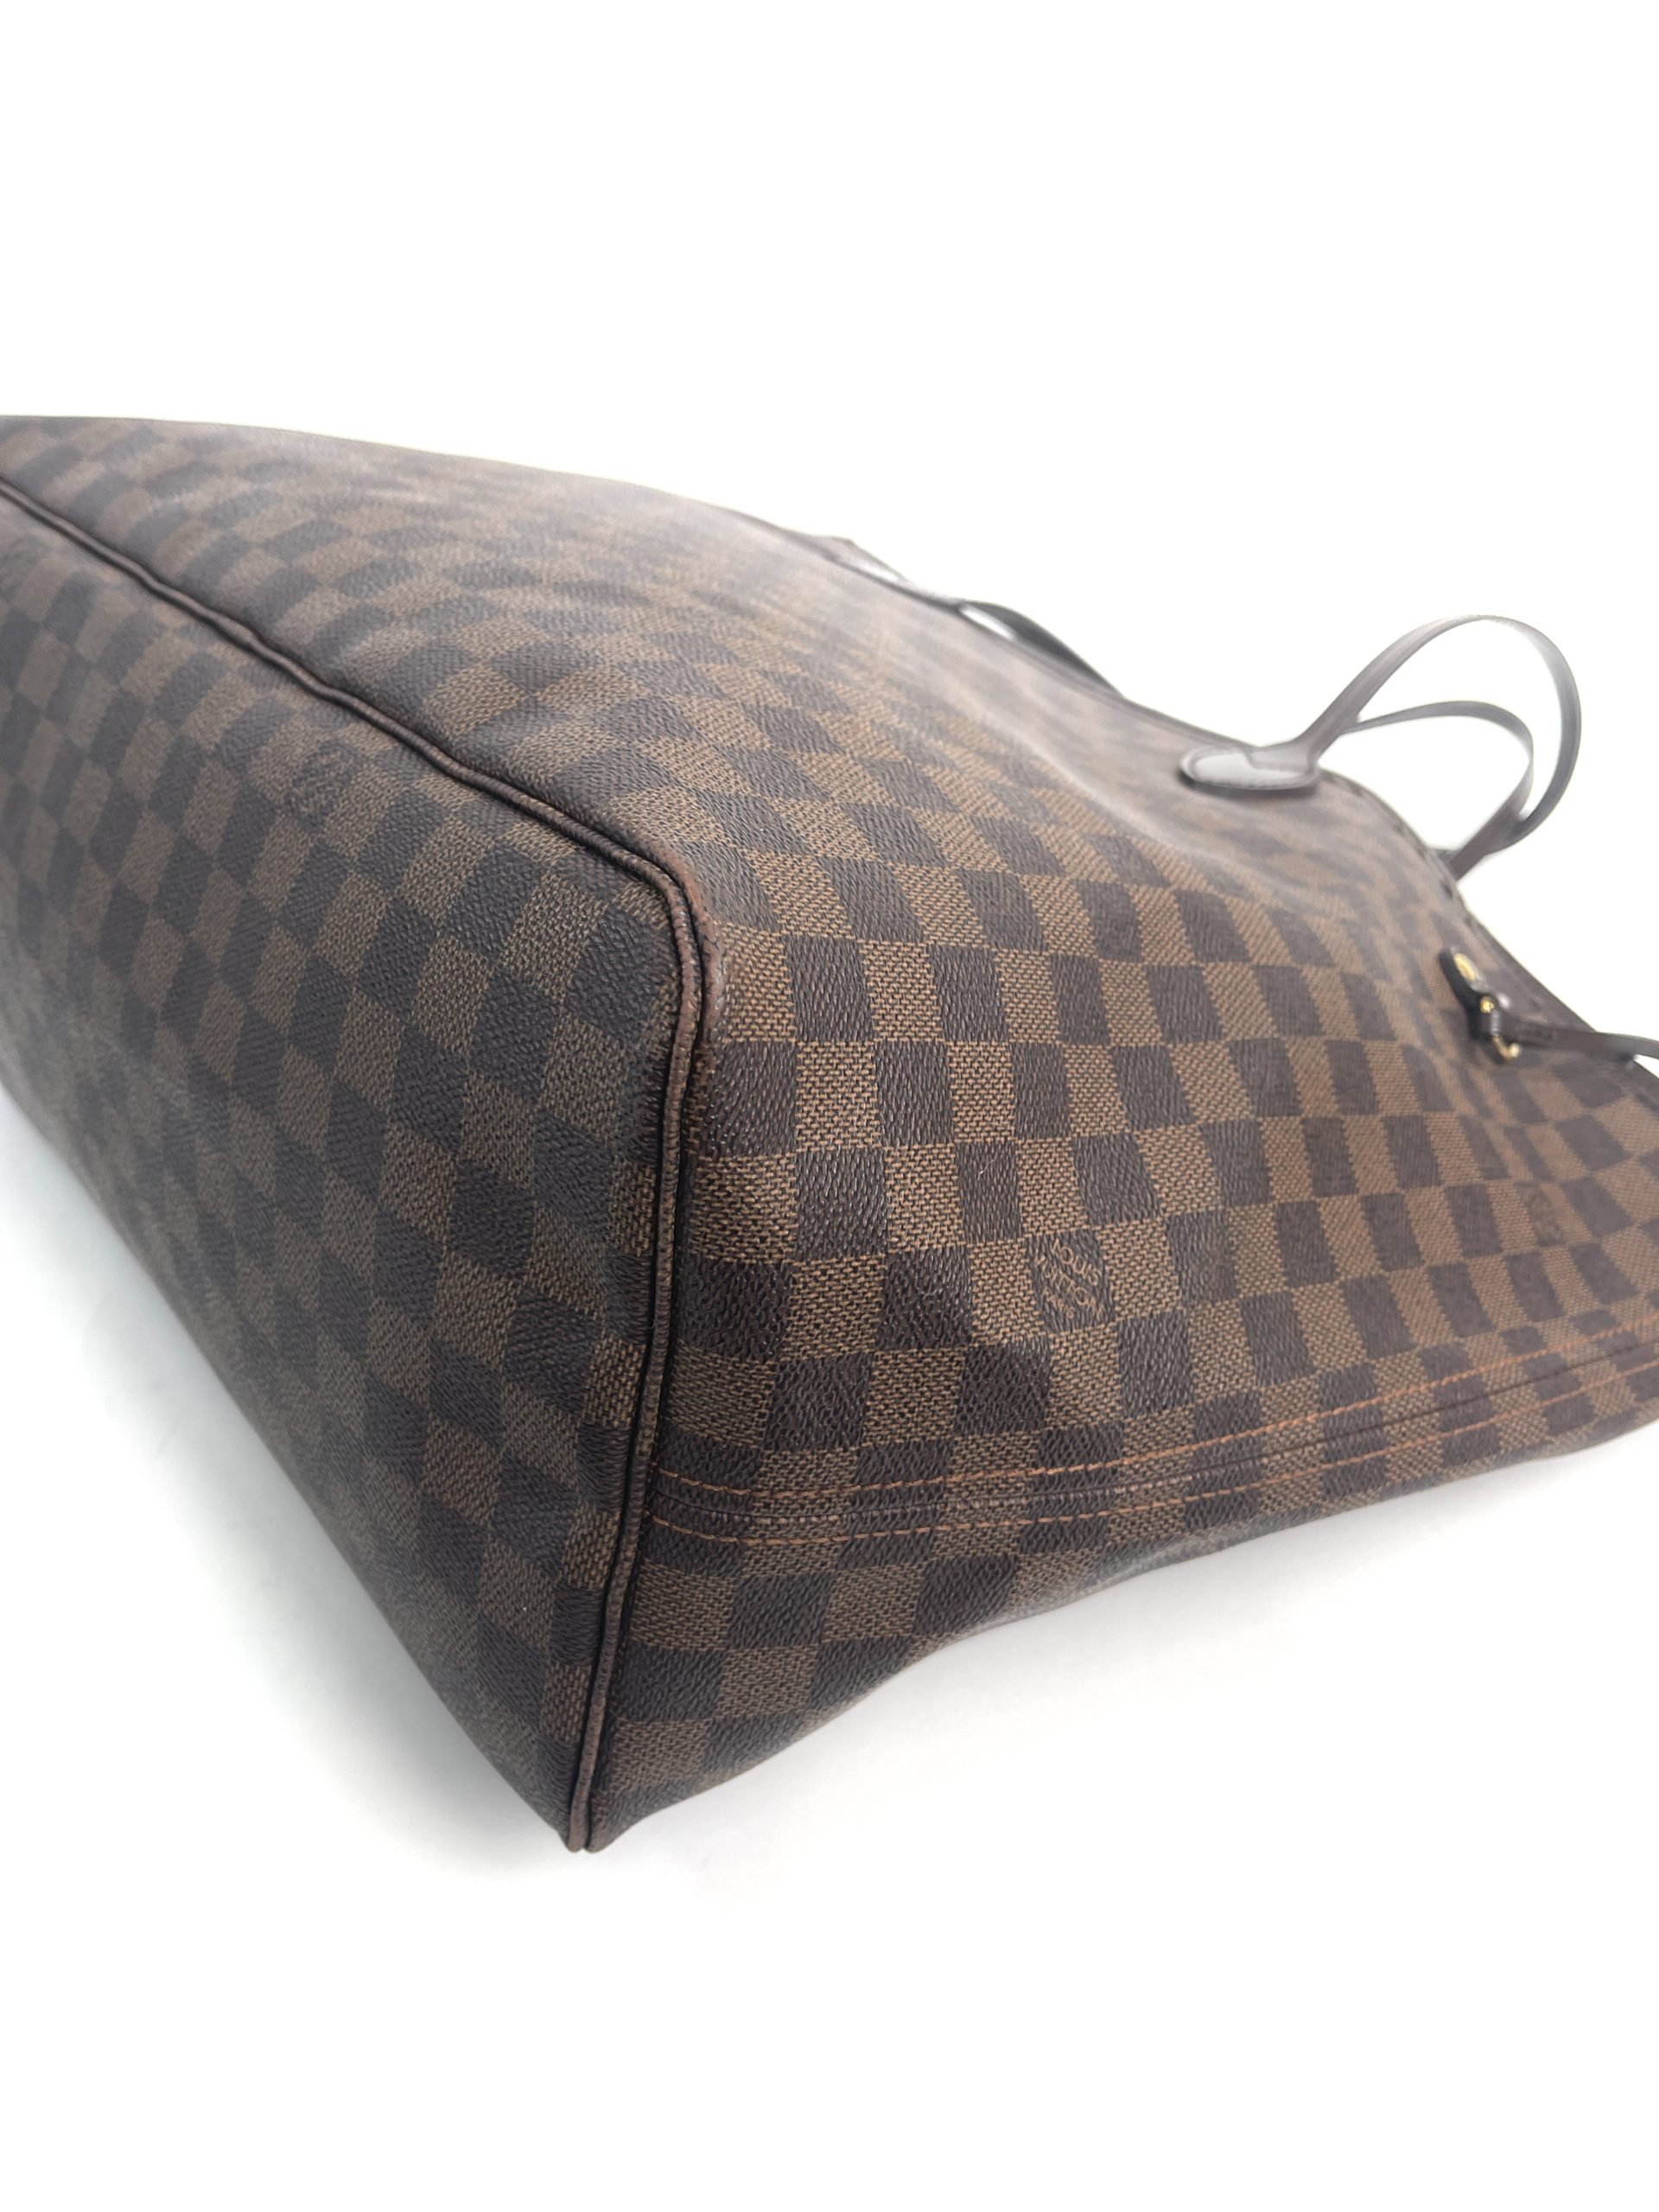 Louis Vuitton Neverfull GM available, price: 3800 zł (~831 euro